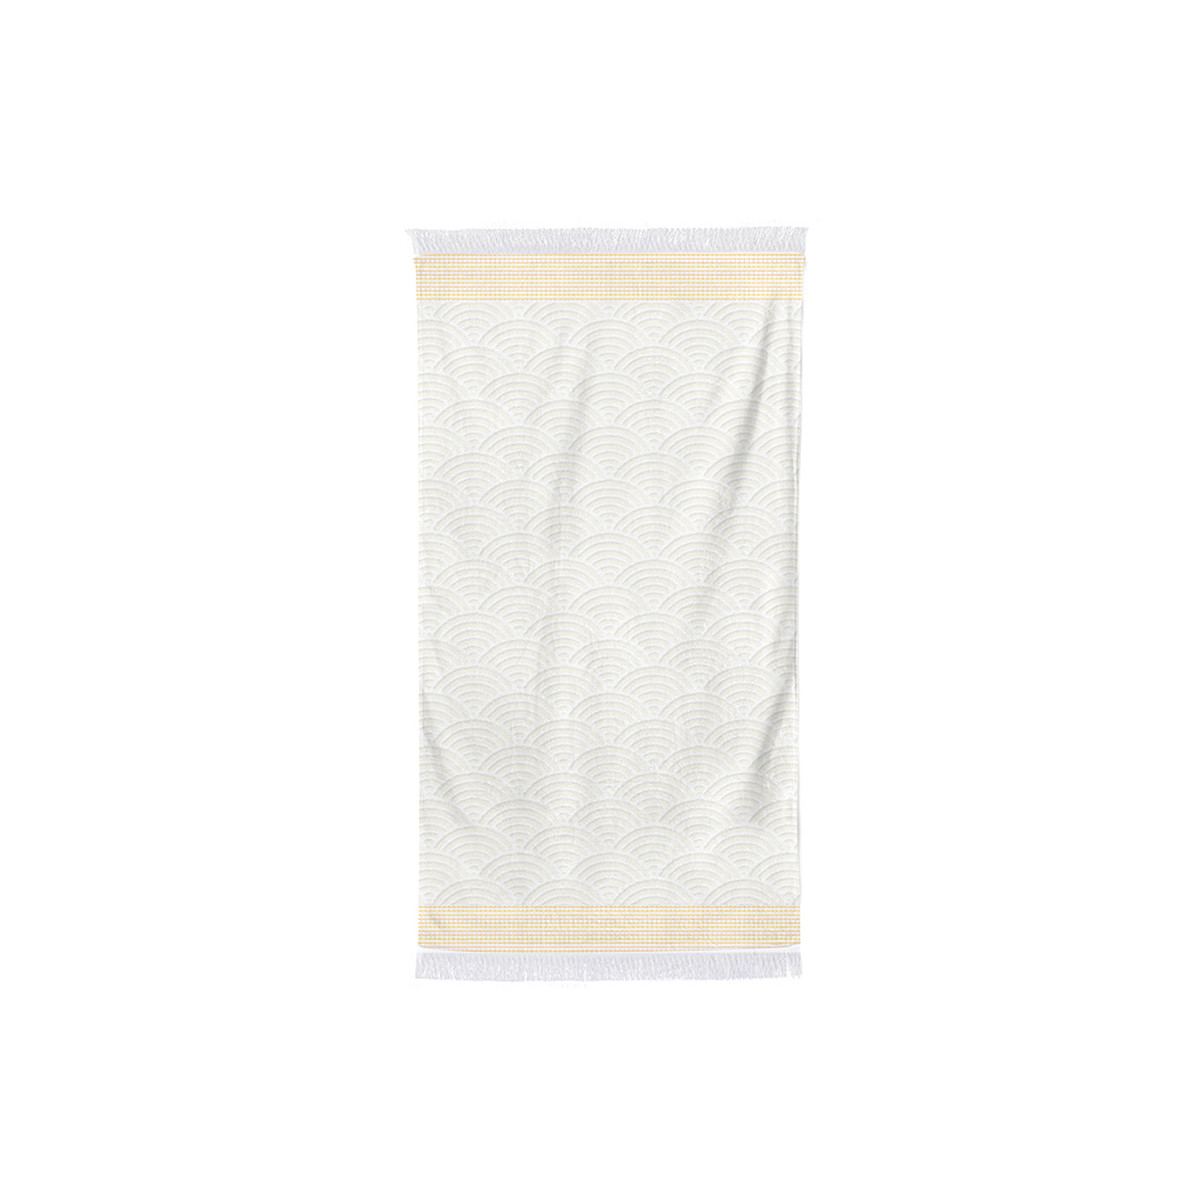 Home Towel and flannel Maison Jean-Vier Artea Yellow / Gold